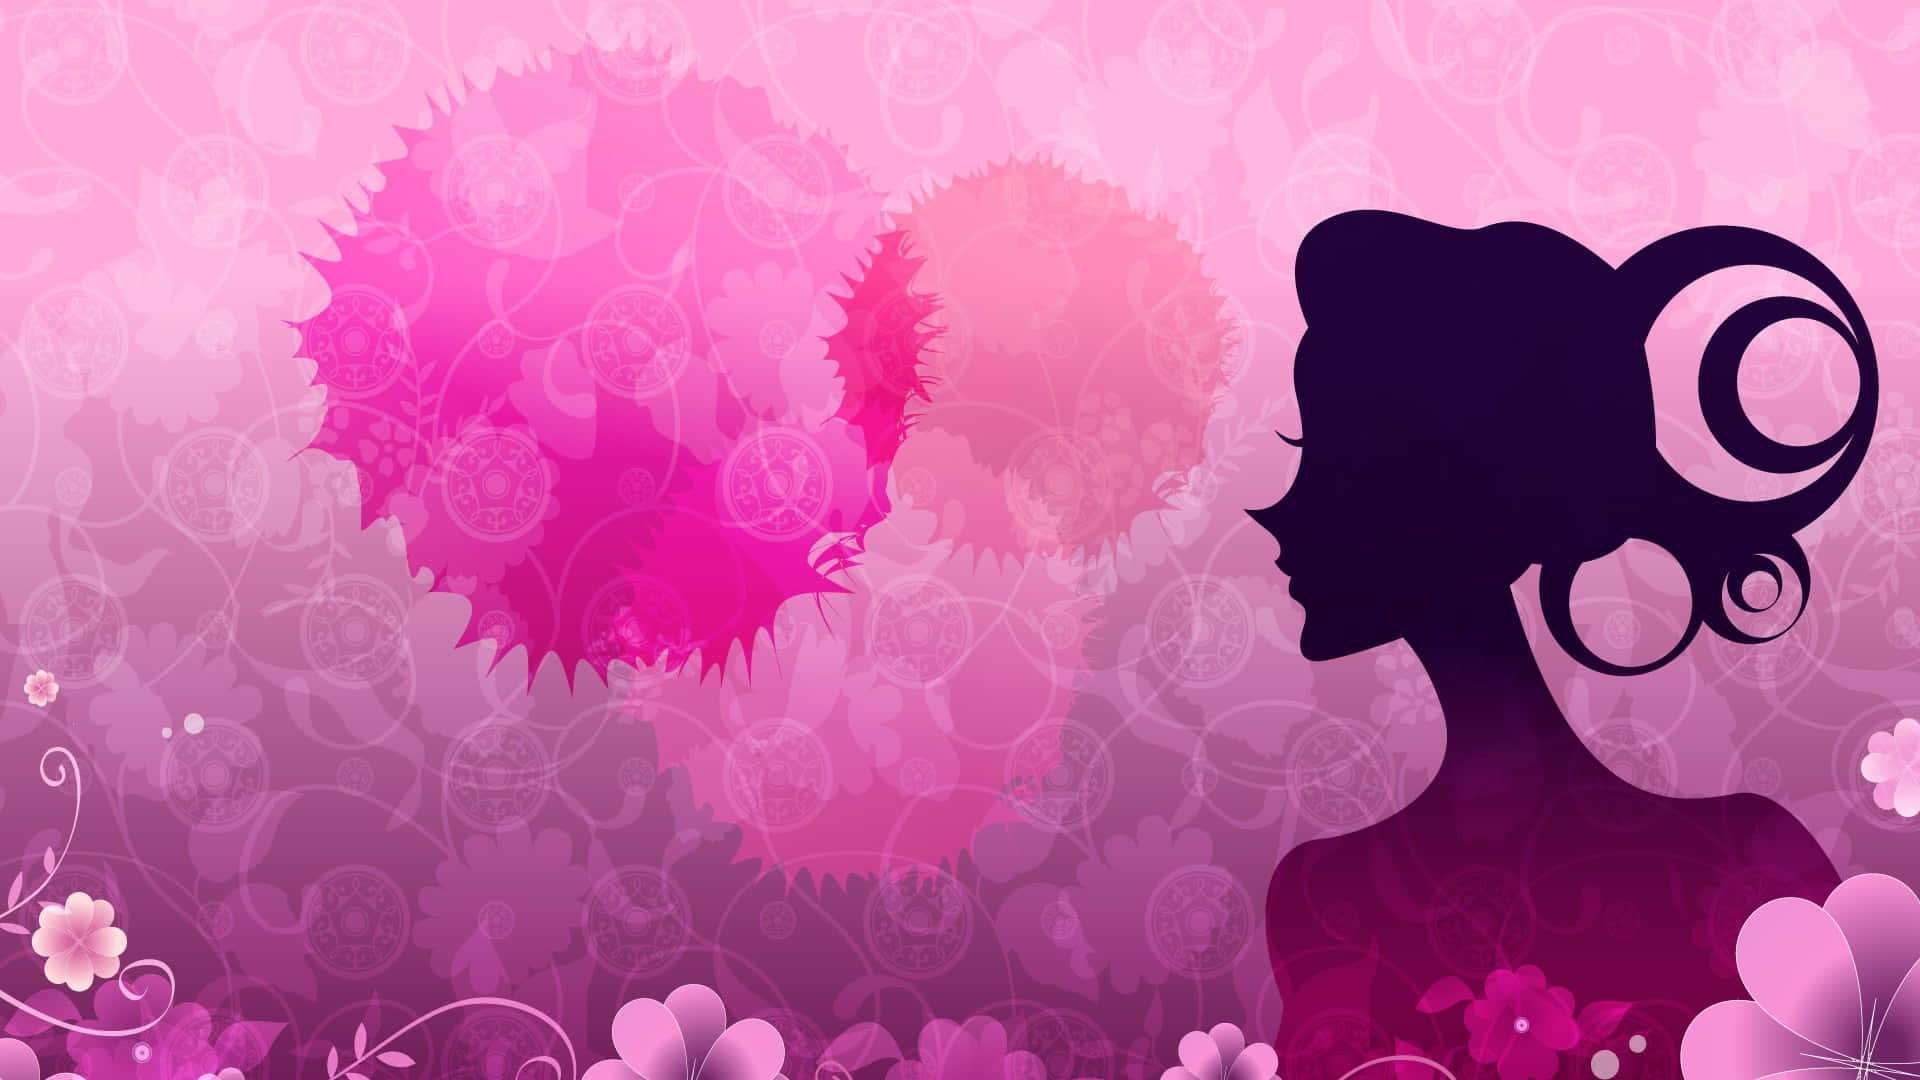 A Woman's Silhouette Is Shown Against A Pink Background Wallpaper